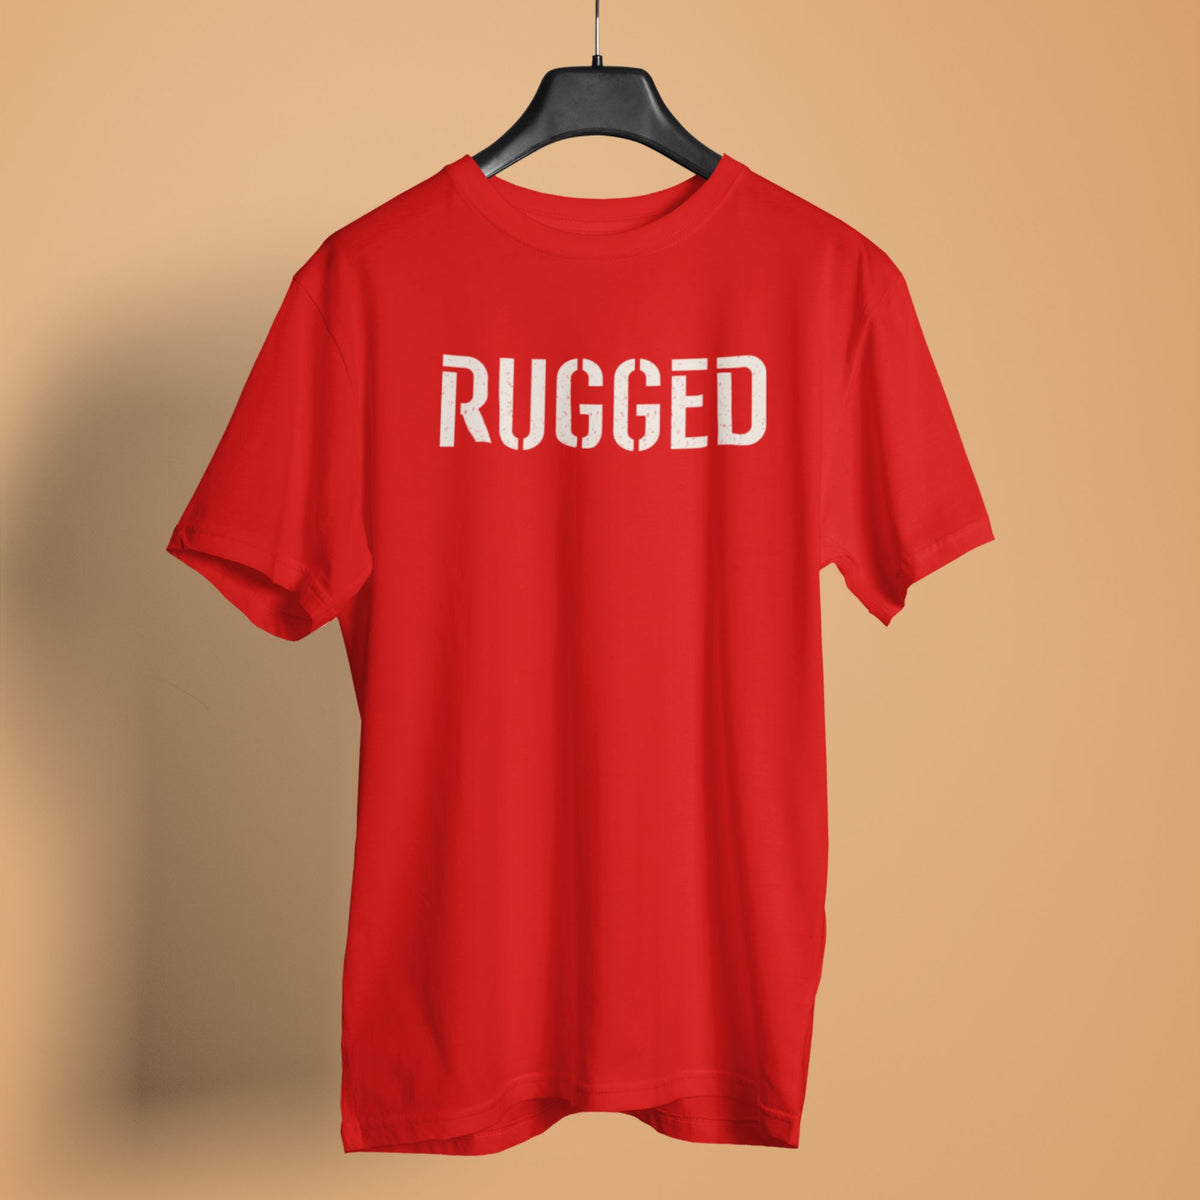 rugged-red-selfie-sporty-shirt-half-sleeve-t-shirt-men-s-graphic-t-shirts #color_red